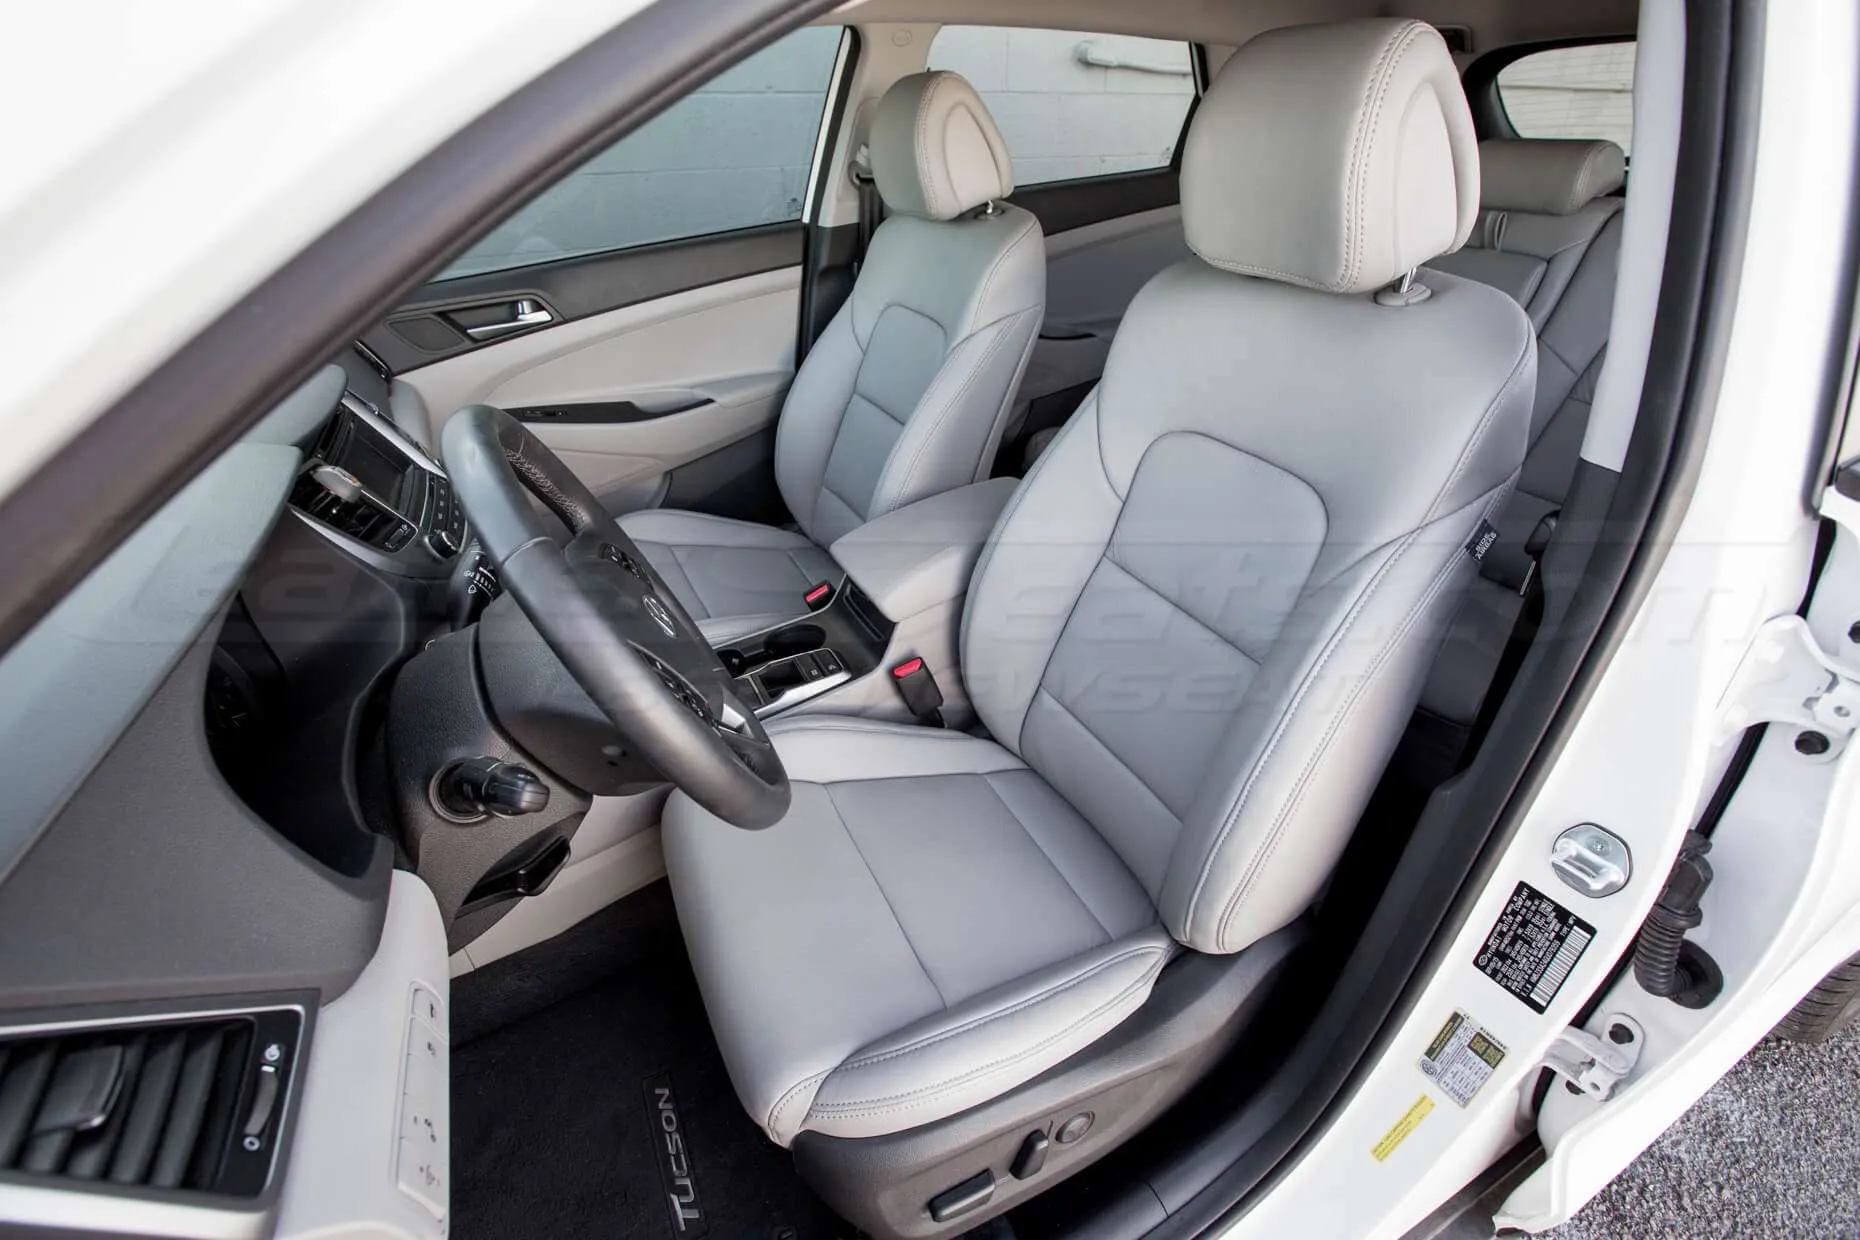 Honda Tucson Installed Leather Seats - Ash - Front driver seat alternative angle